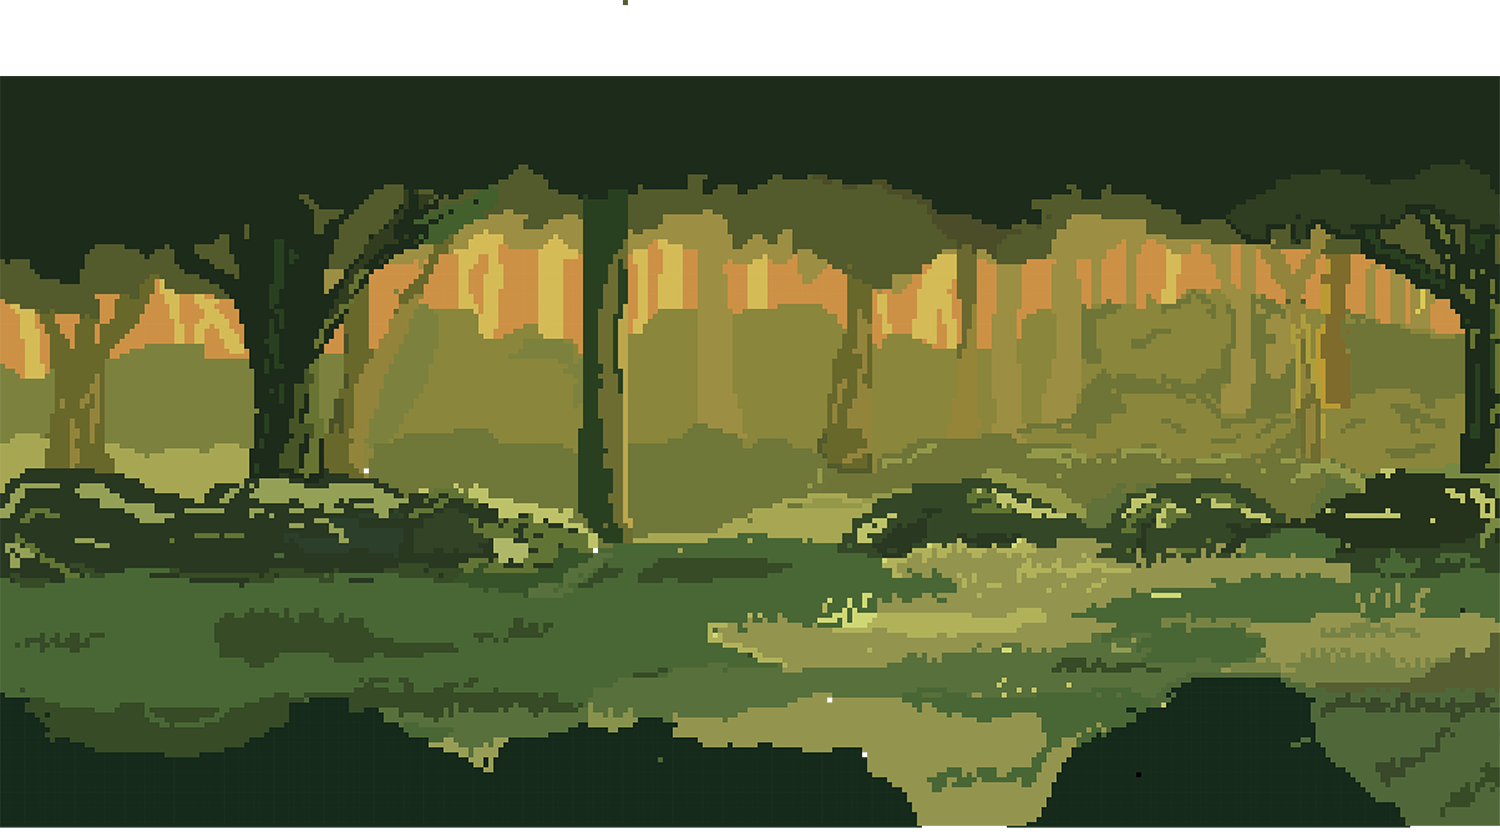 an 8-bit design of a forest for a video game